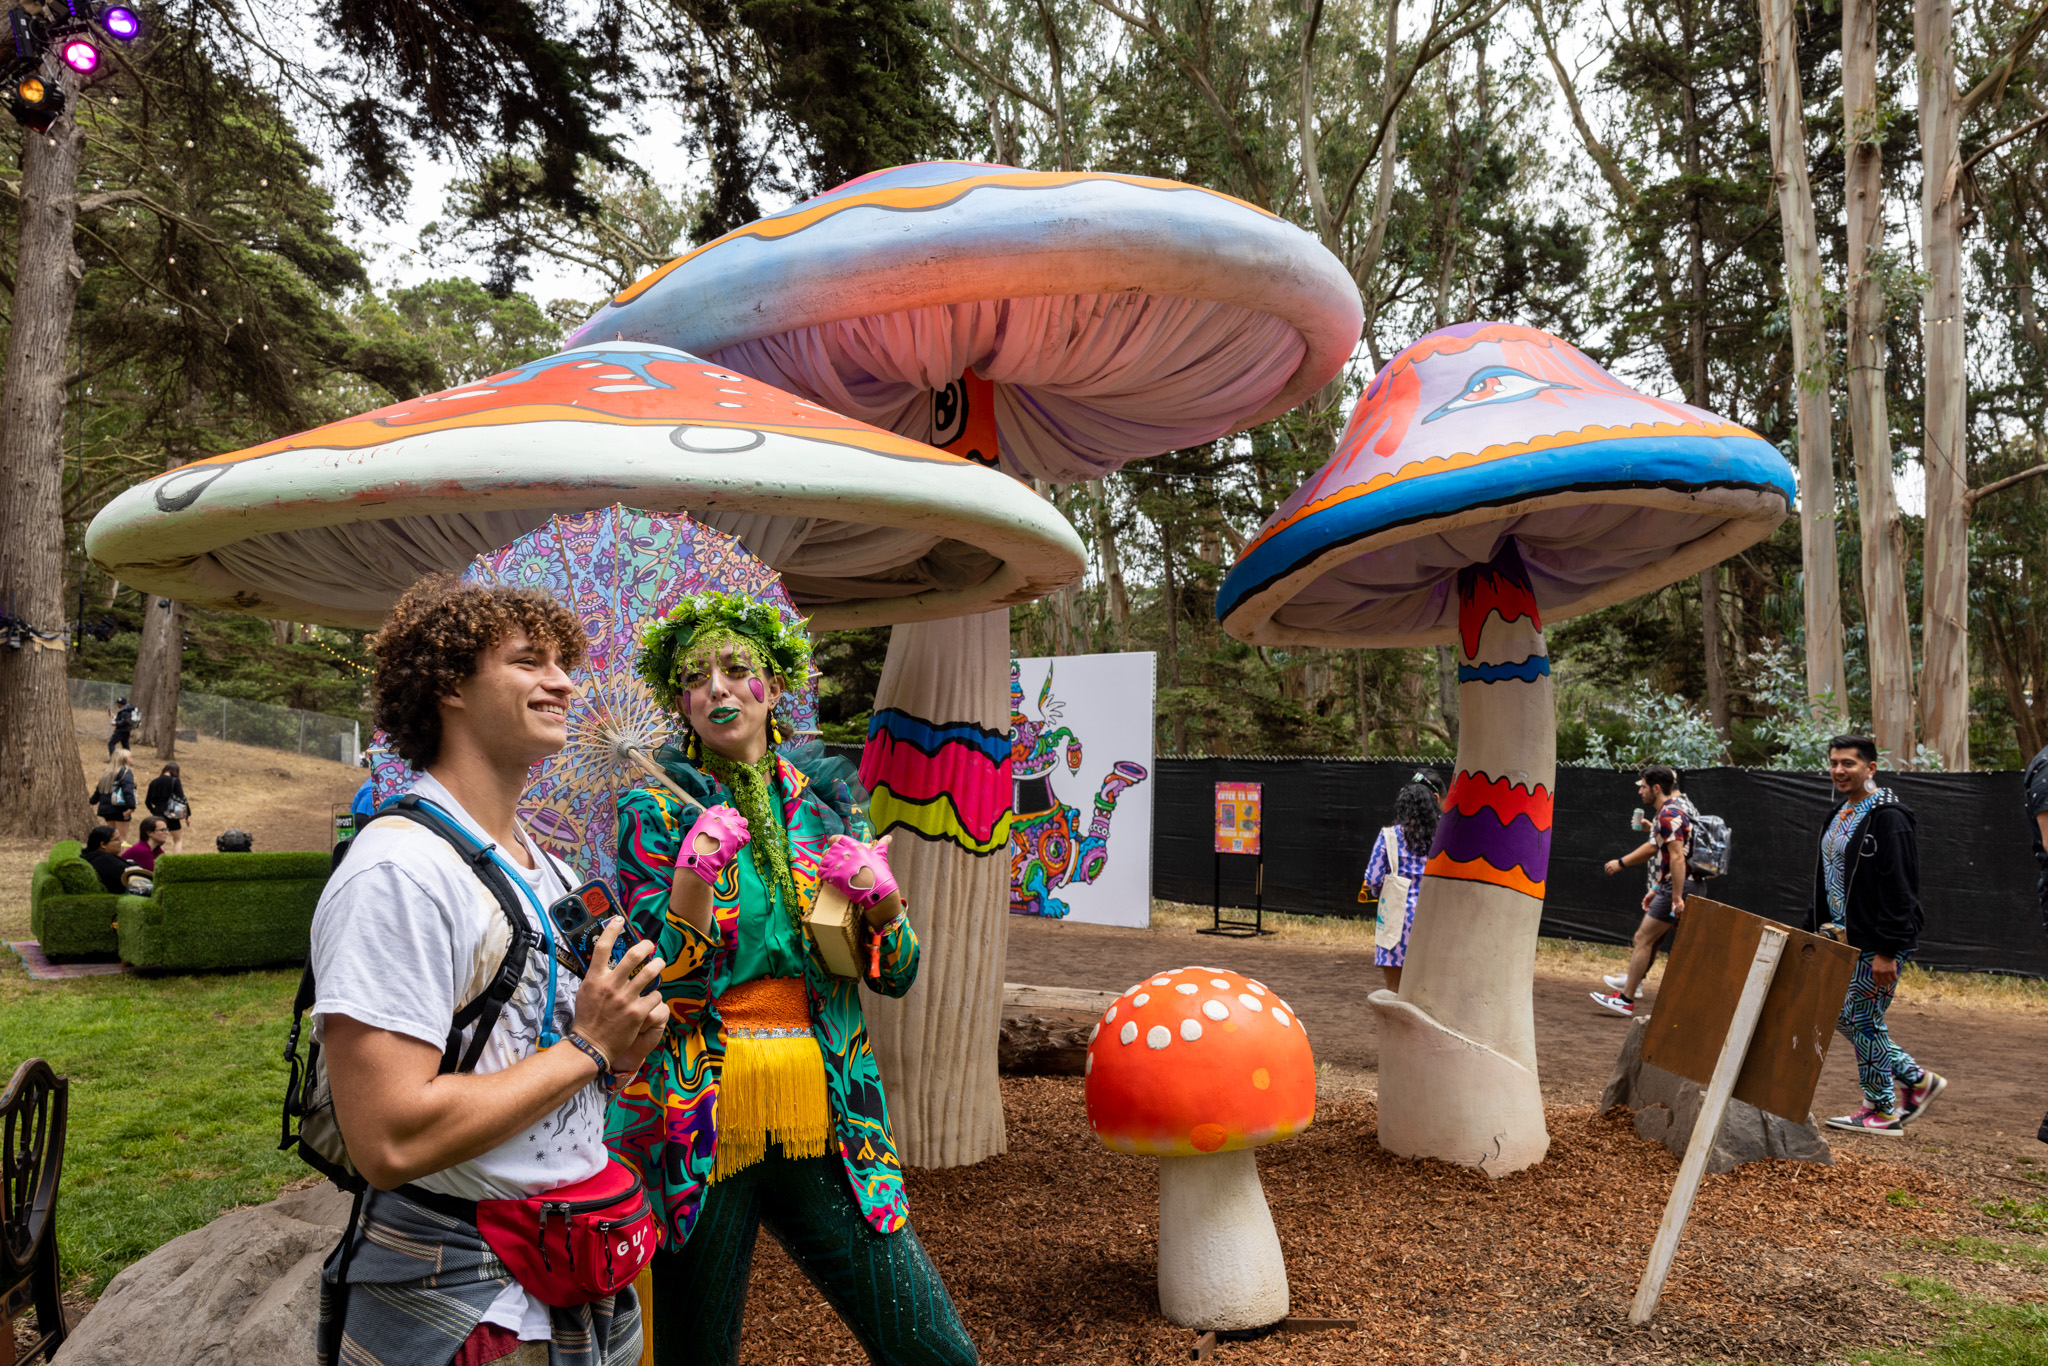 Two people in colorful costumes stand near large, whimsical mushroom sculptures in a wooded area.